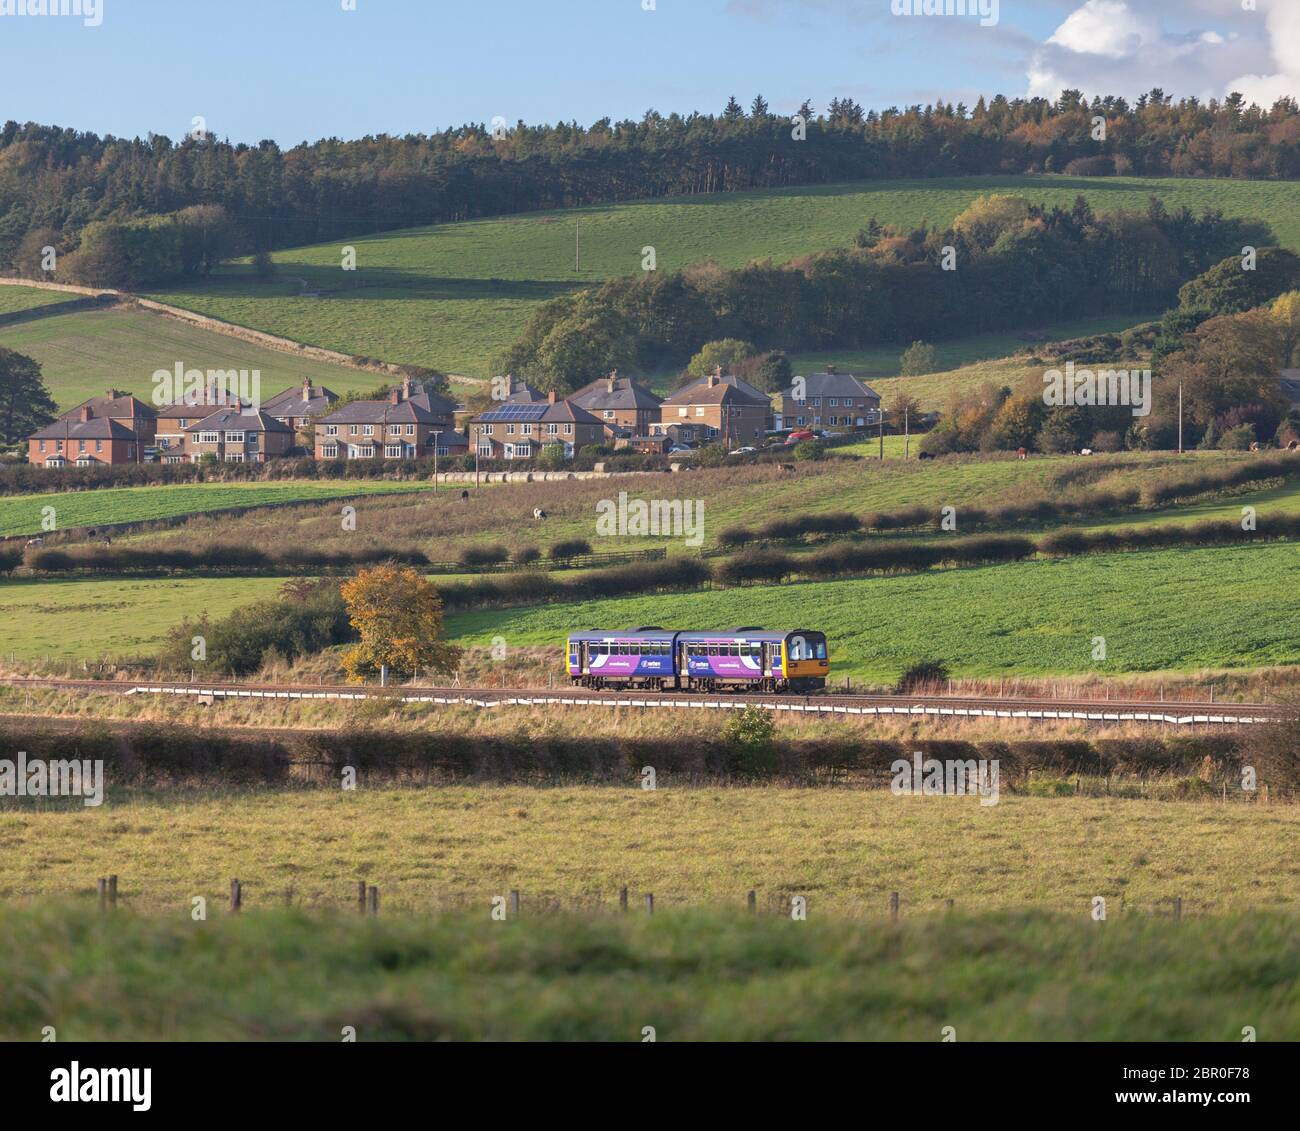 Northern rail class 142 pacer train 142017 passing the countryside at High Warden on the Tyne valley railway line with a stopping train Stock Photo